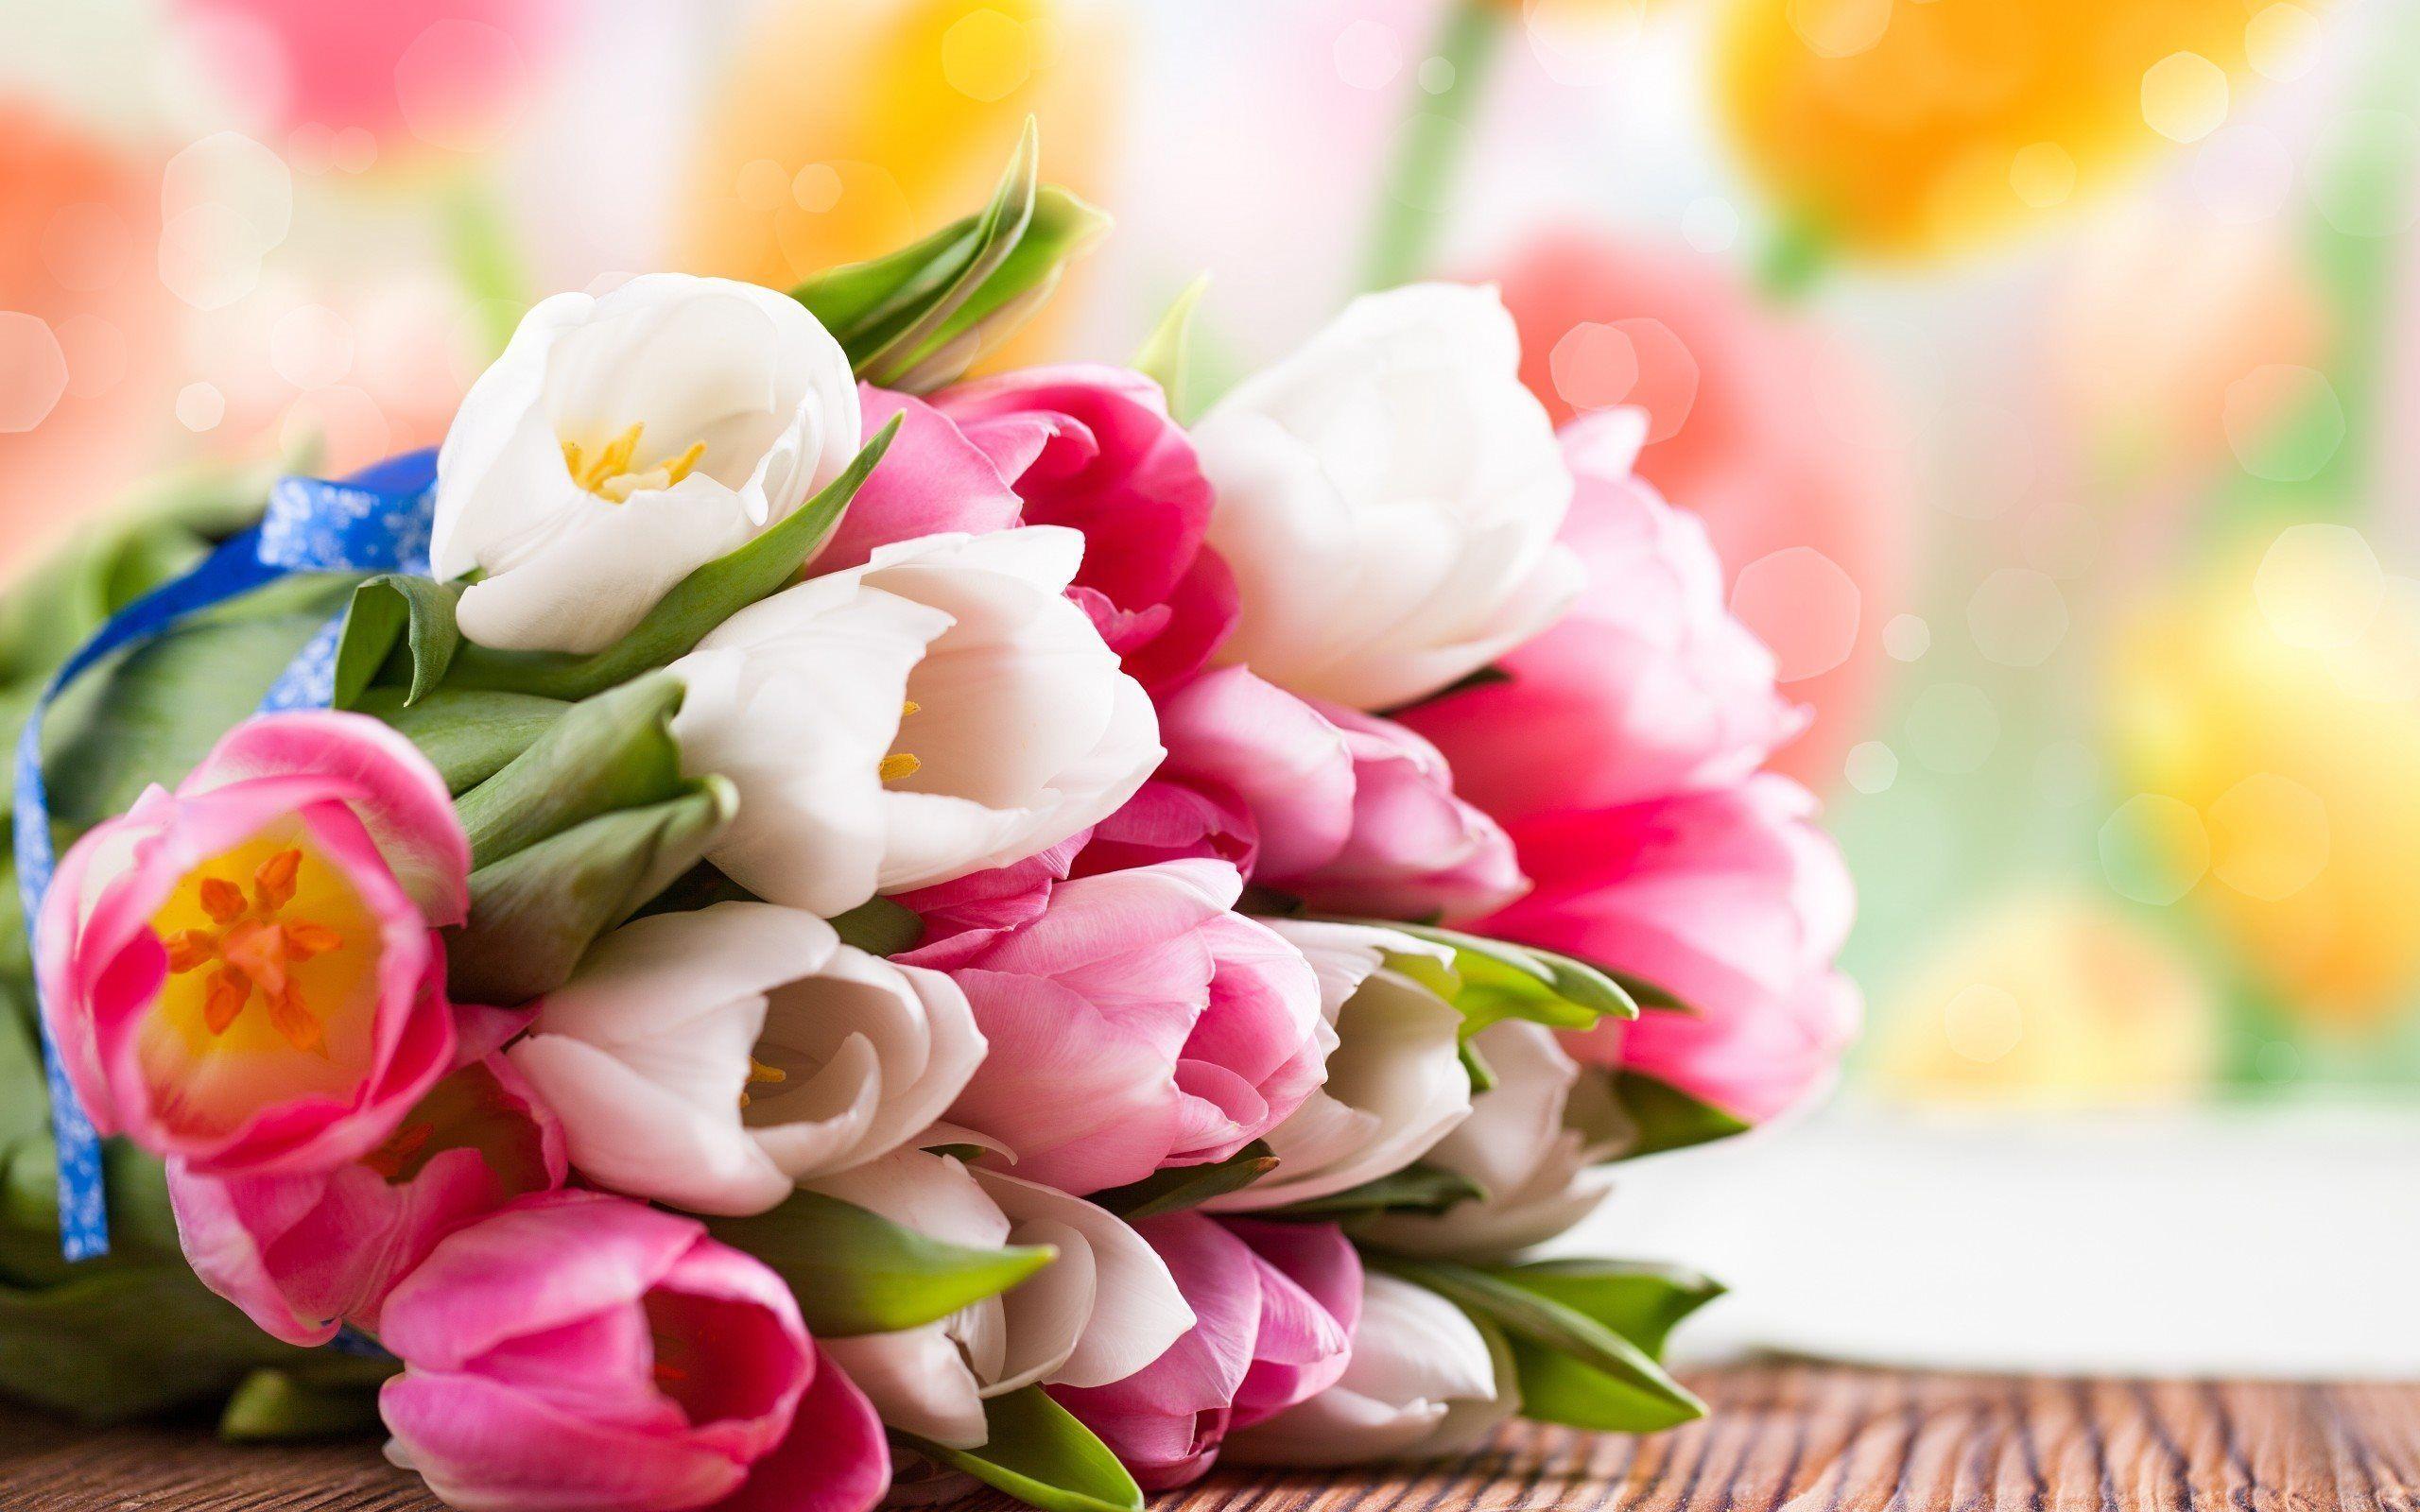 Colourful Flowers Wallpaper. Colourful Flowers Beautiful Tulips